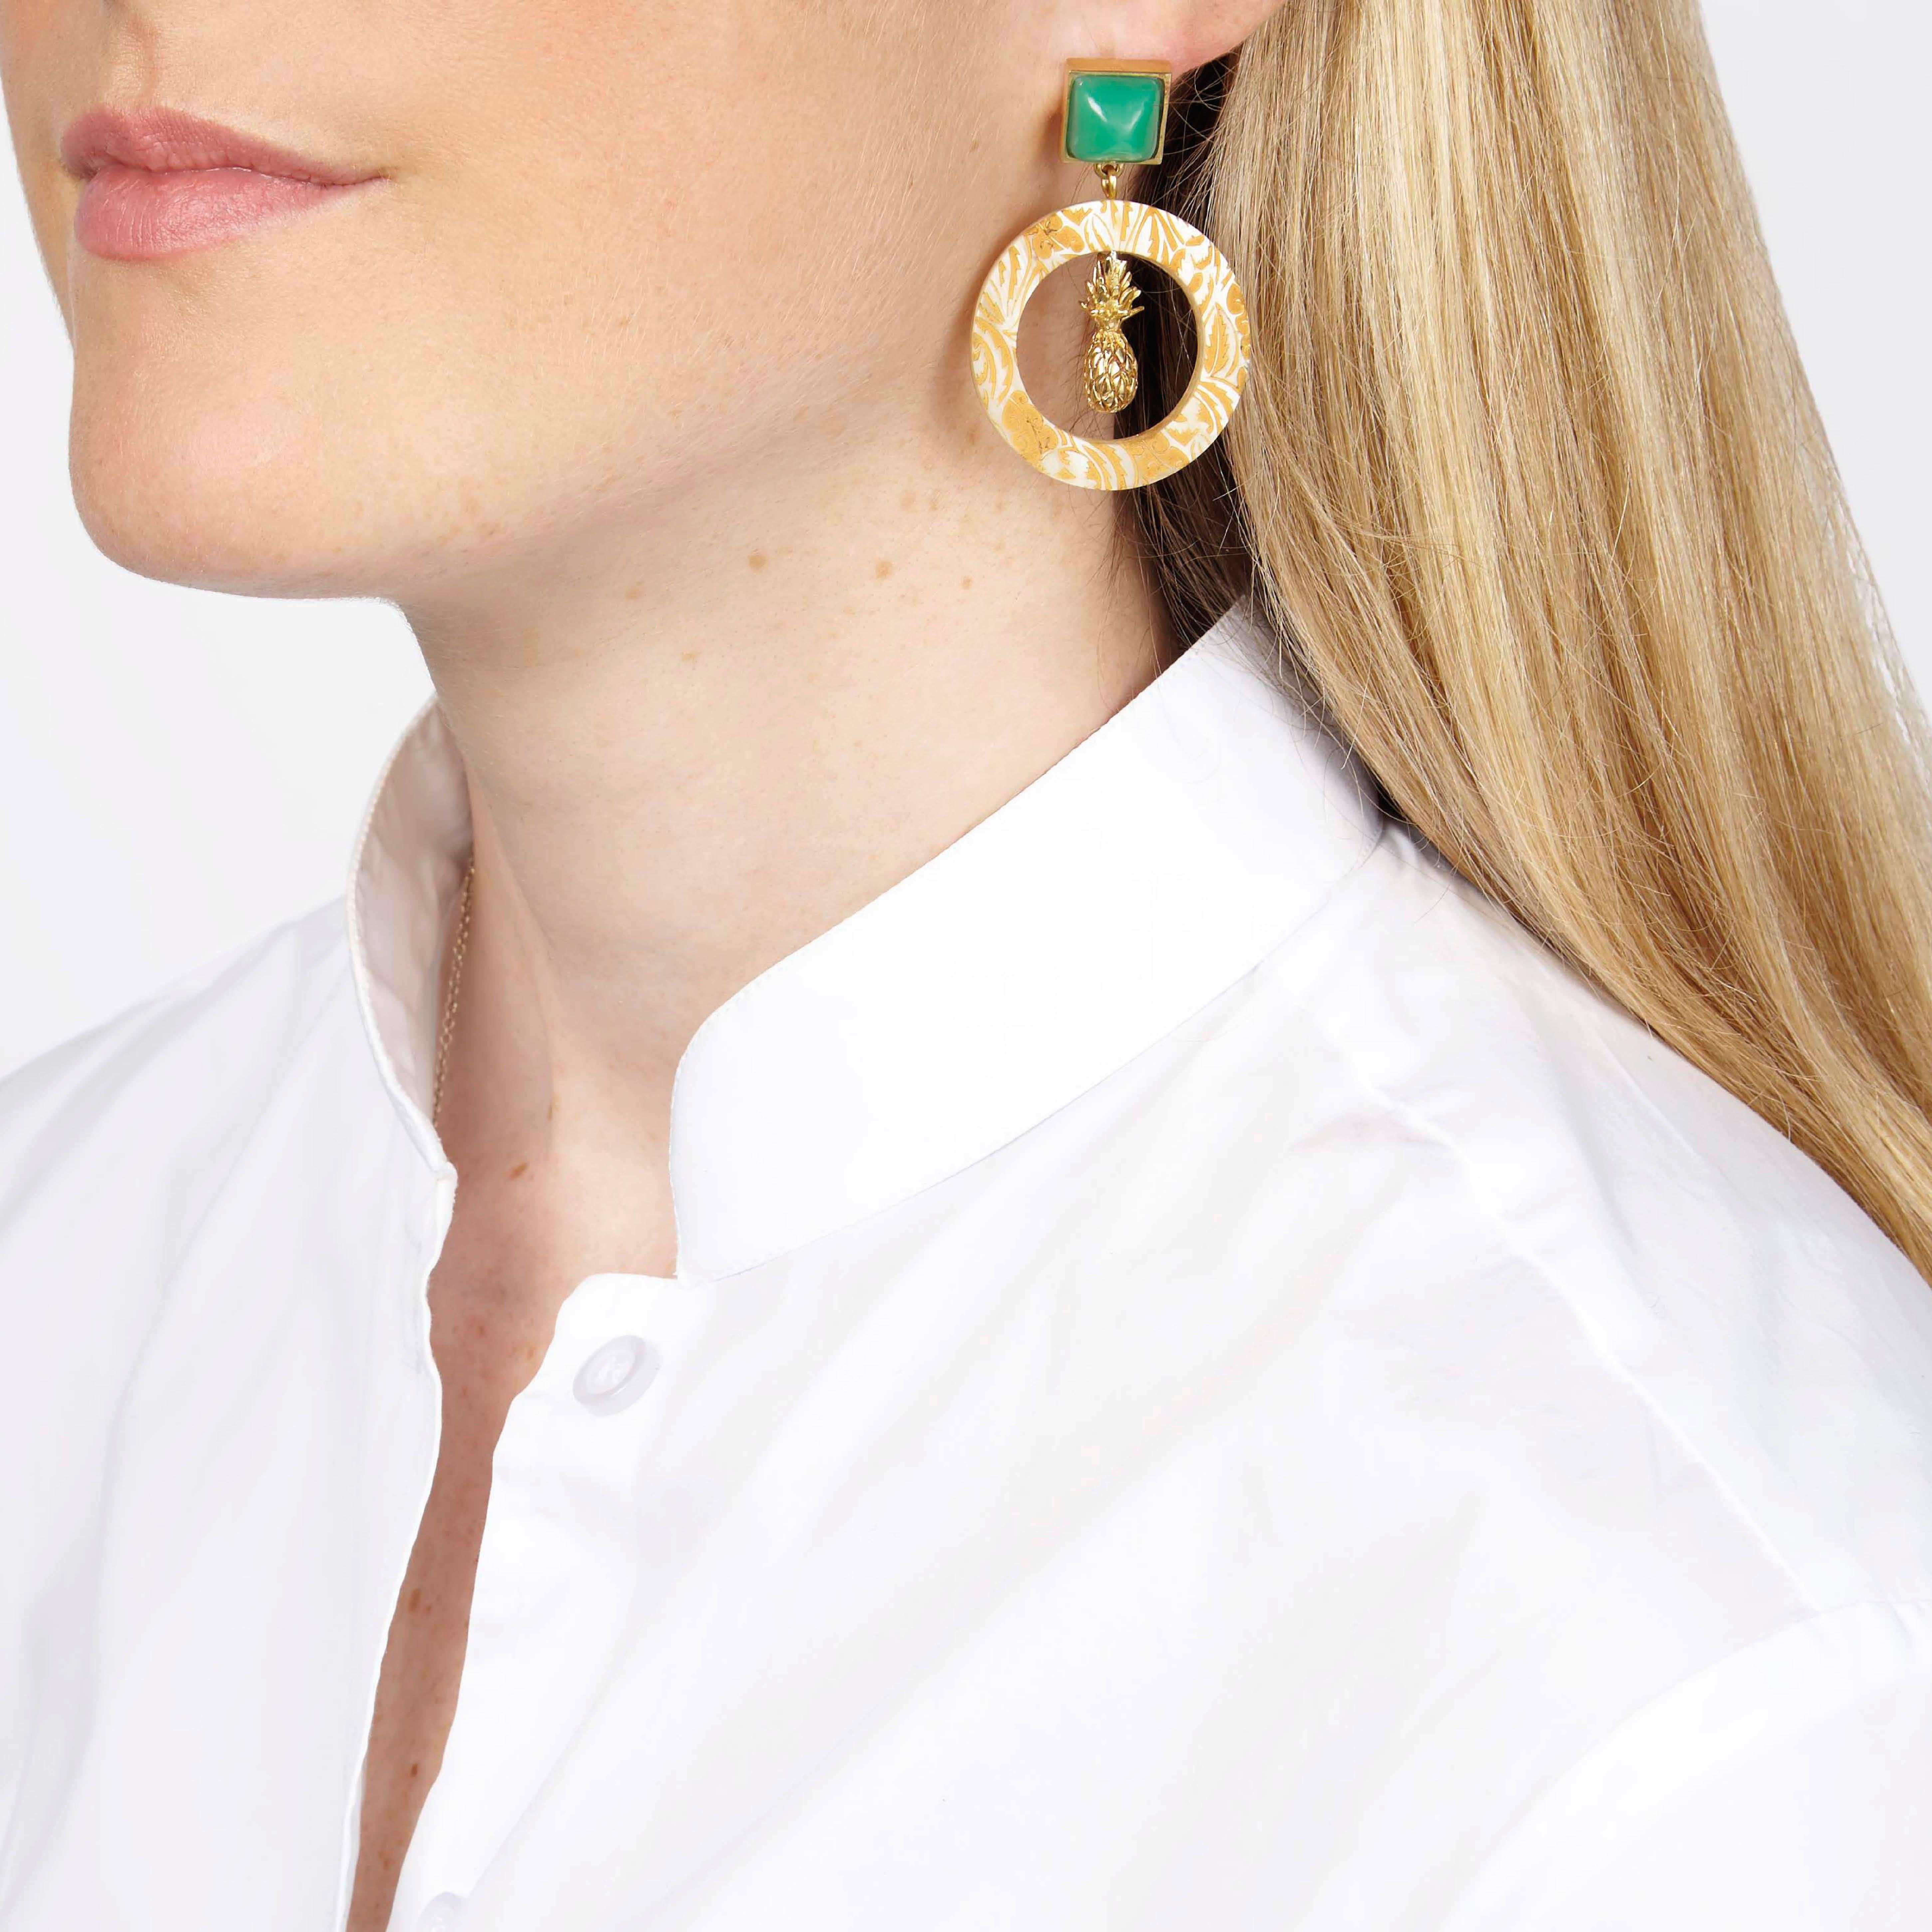 These unusual and finely crafted chrysoprase gemstone and African cow horn earrings are handmade by artisans in Kenya and finished by hand in London. 

Handmade from natural materials with silver pin-backs for pierced ears. Please note that horn